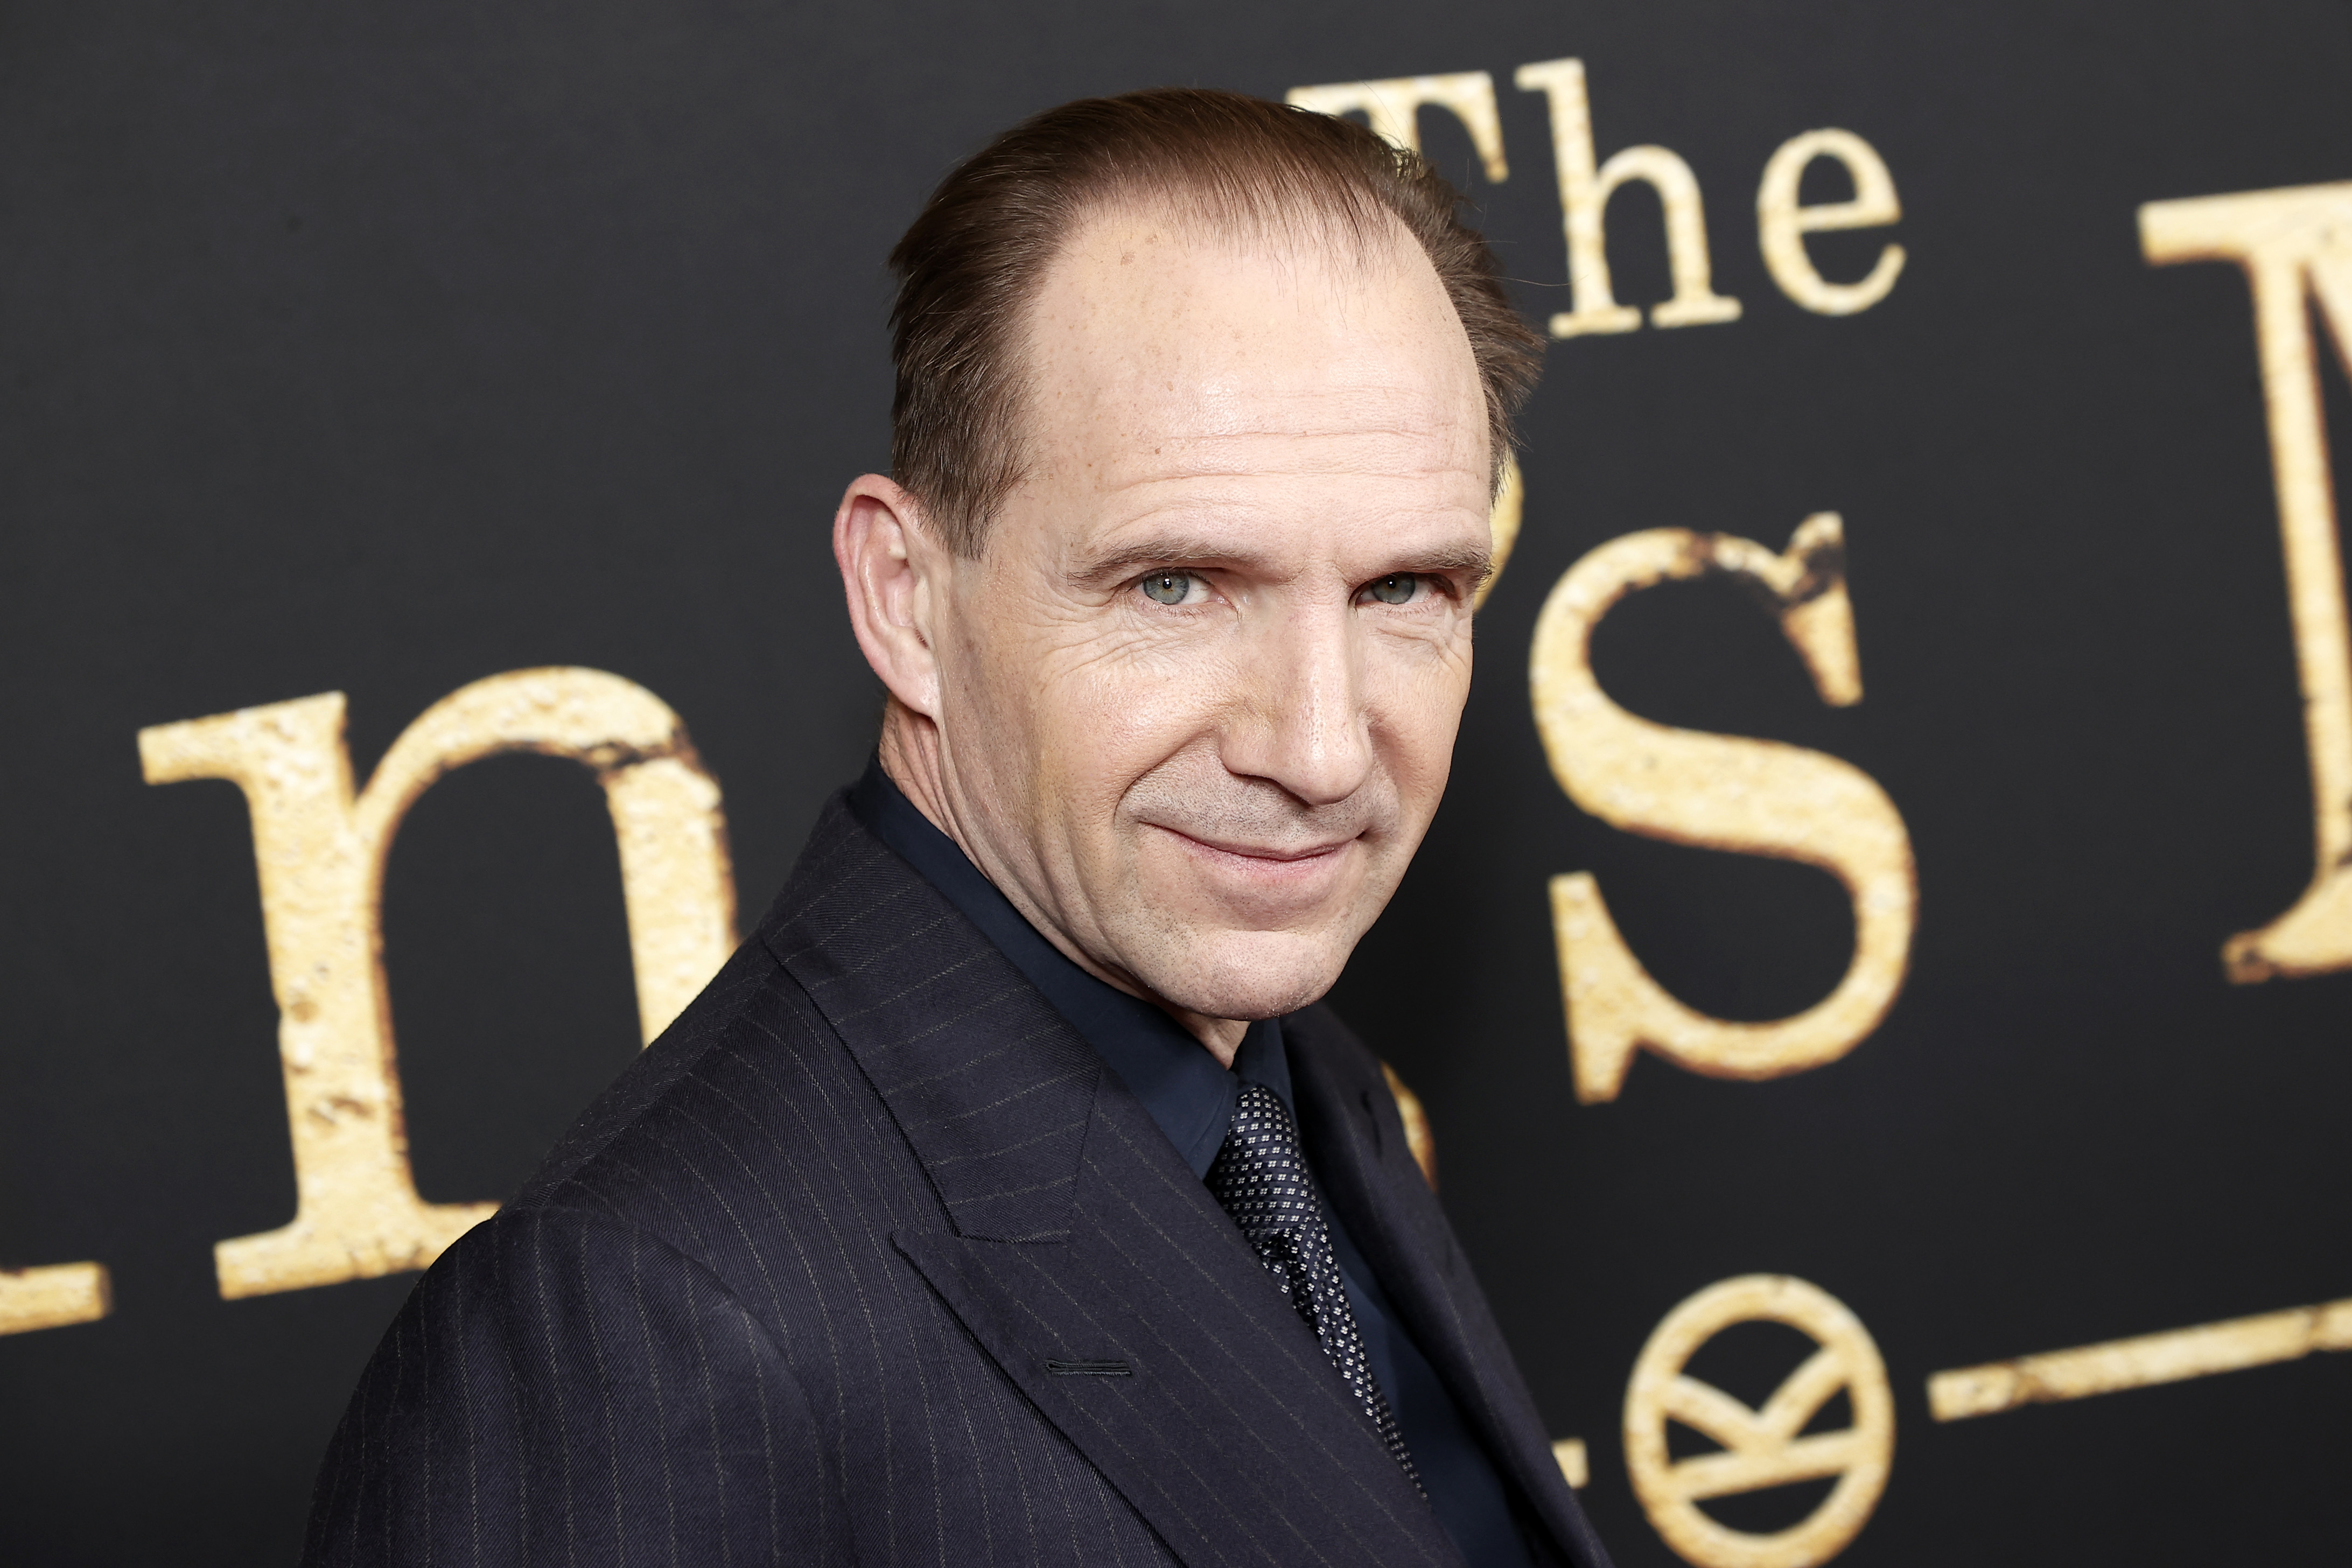 Ralph Fiennes at the 2021 premiere of The King's Man in New York City